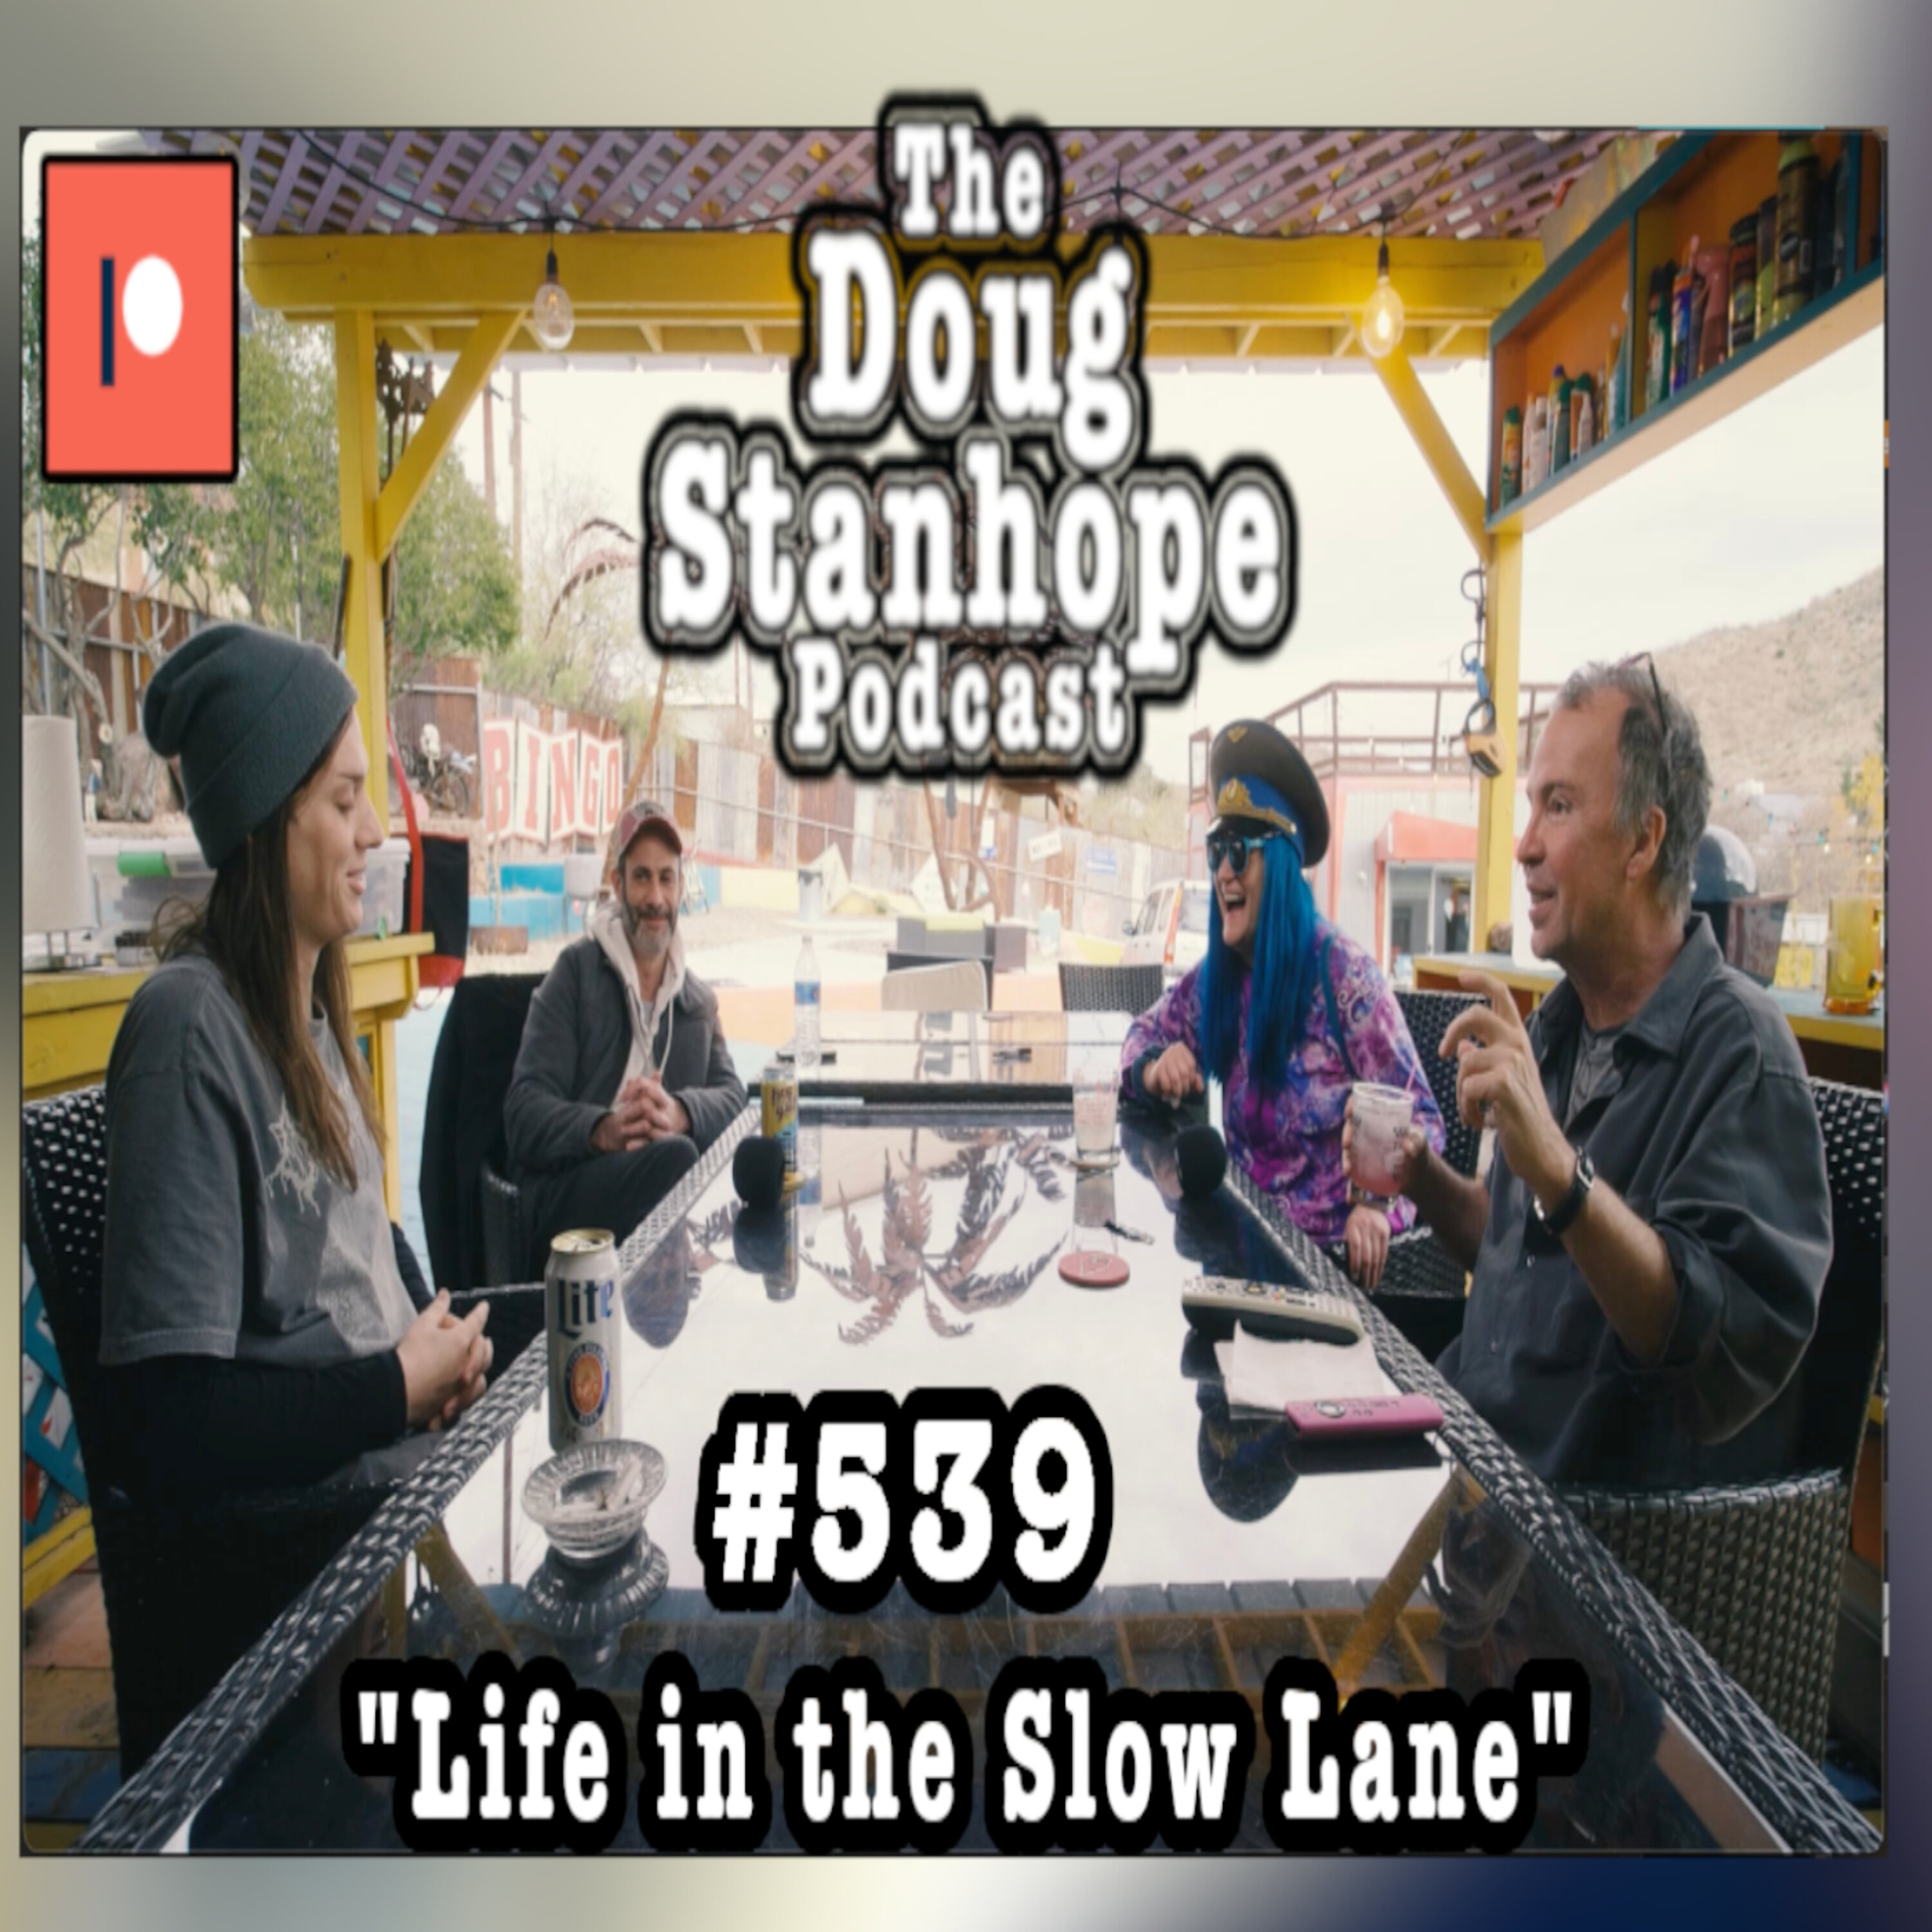 Doug Stanhope Podcast #540 - ”Life in the Slow Lane”